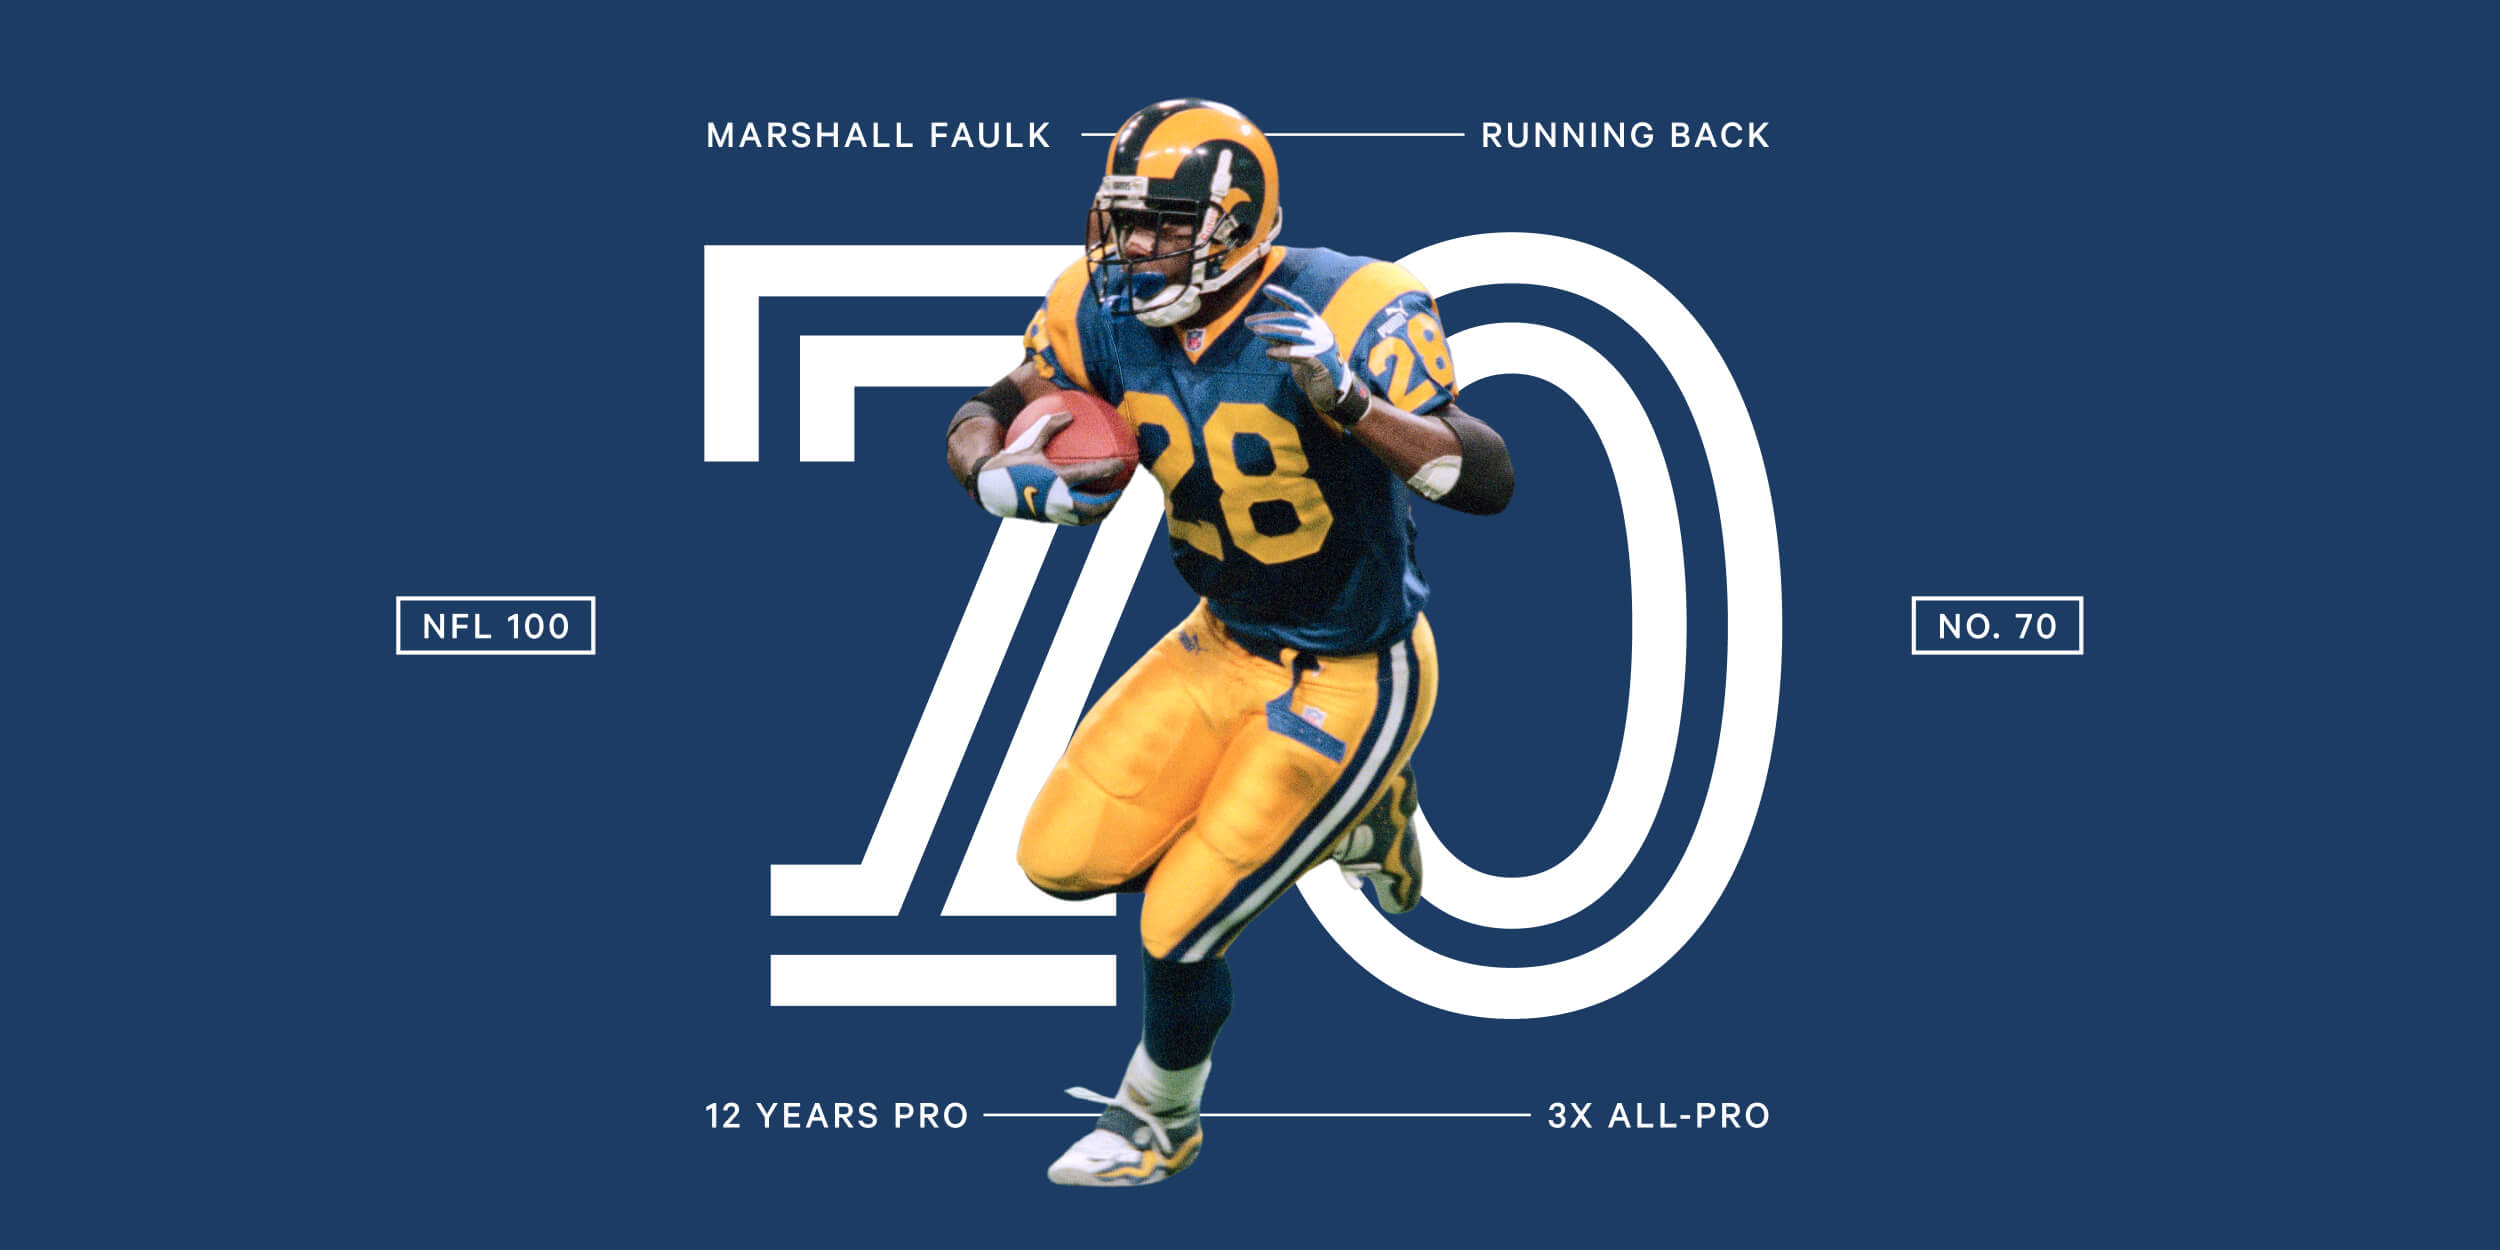 NFL 100: At No. Marshall Faulk, 'a highlight waiting to happen, ' redefined the running back position